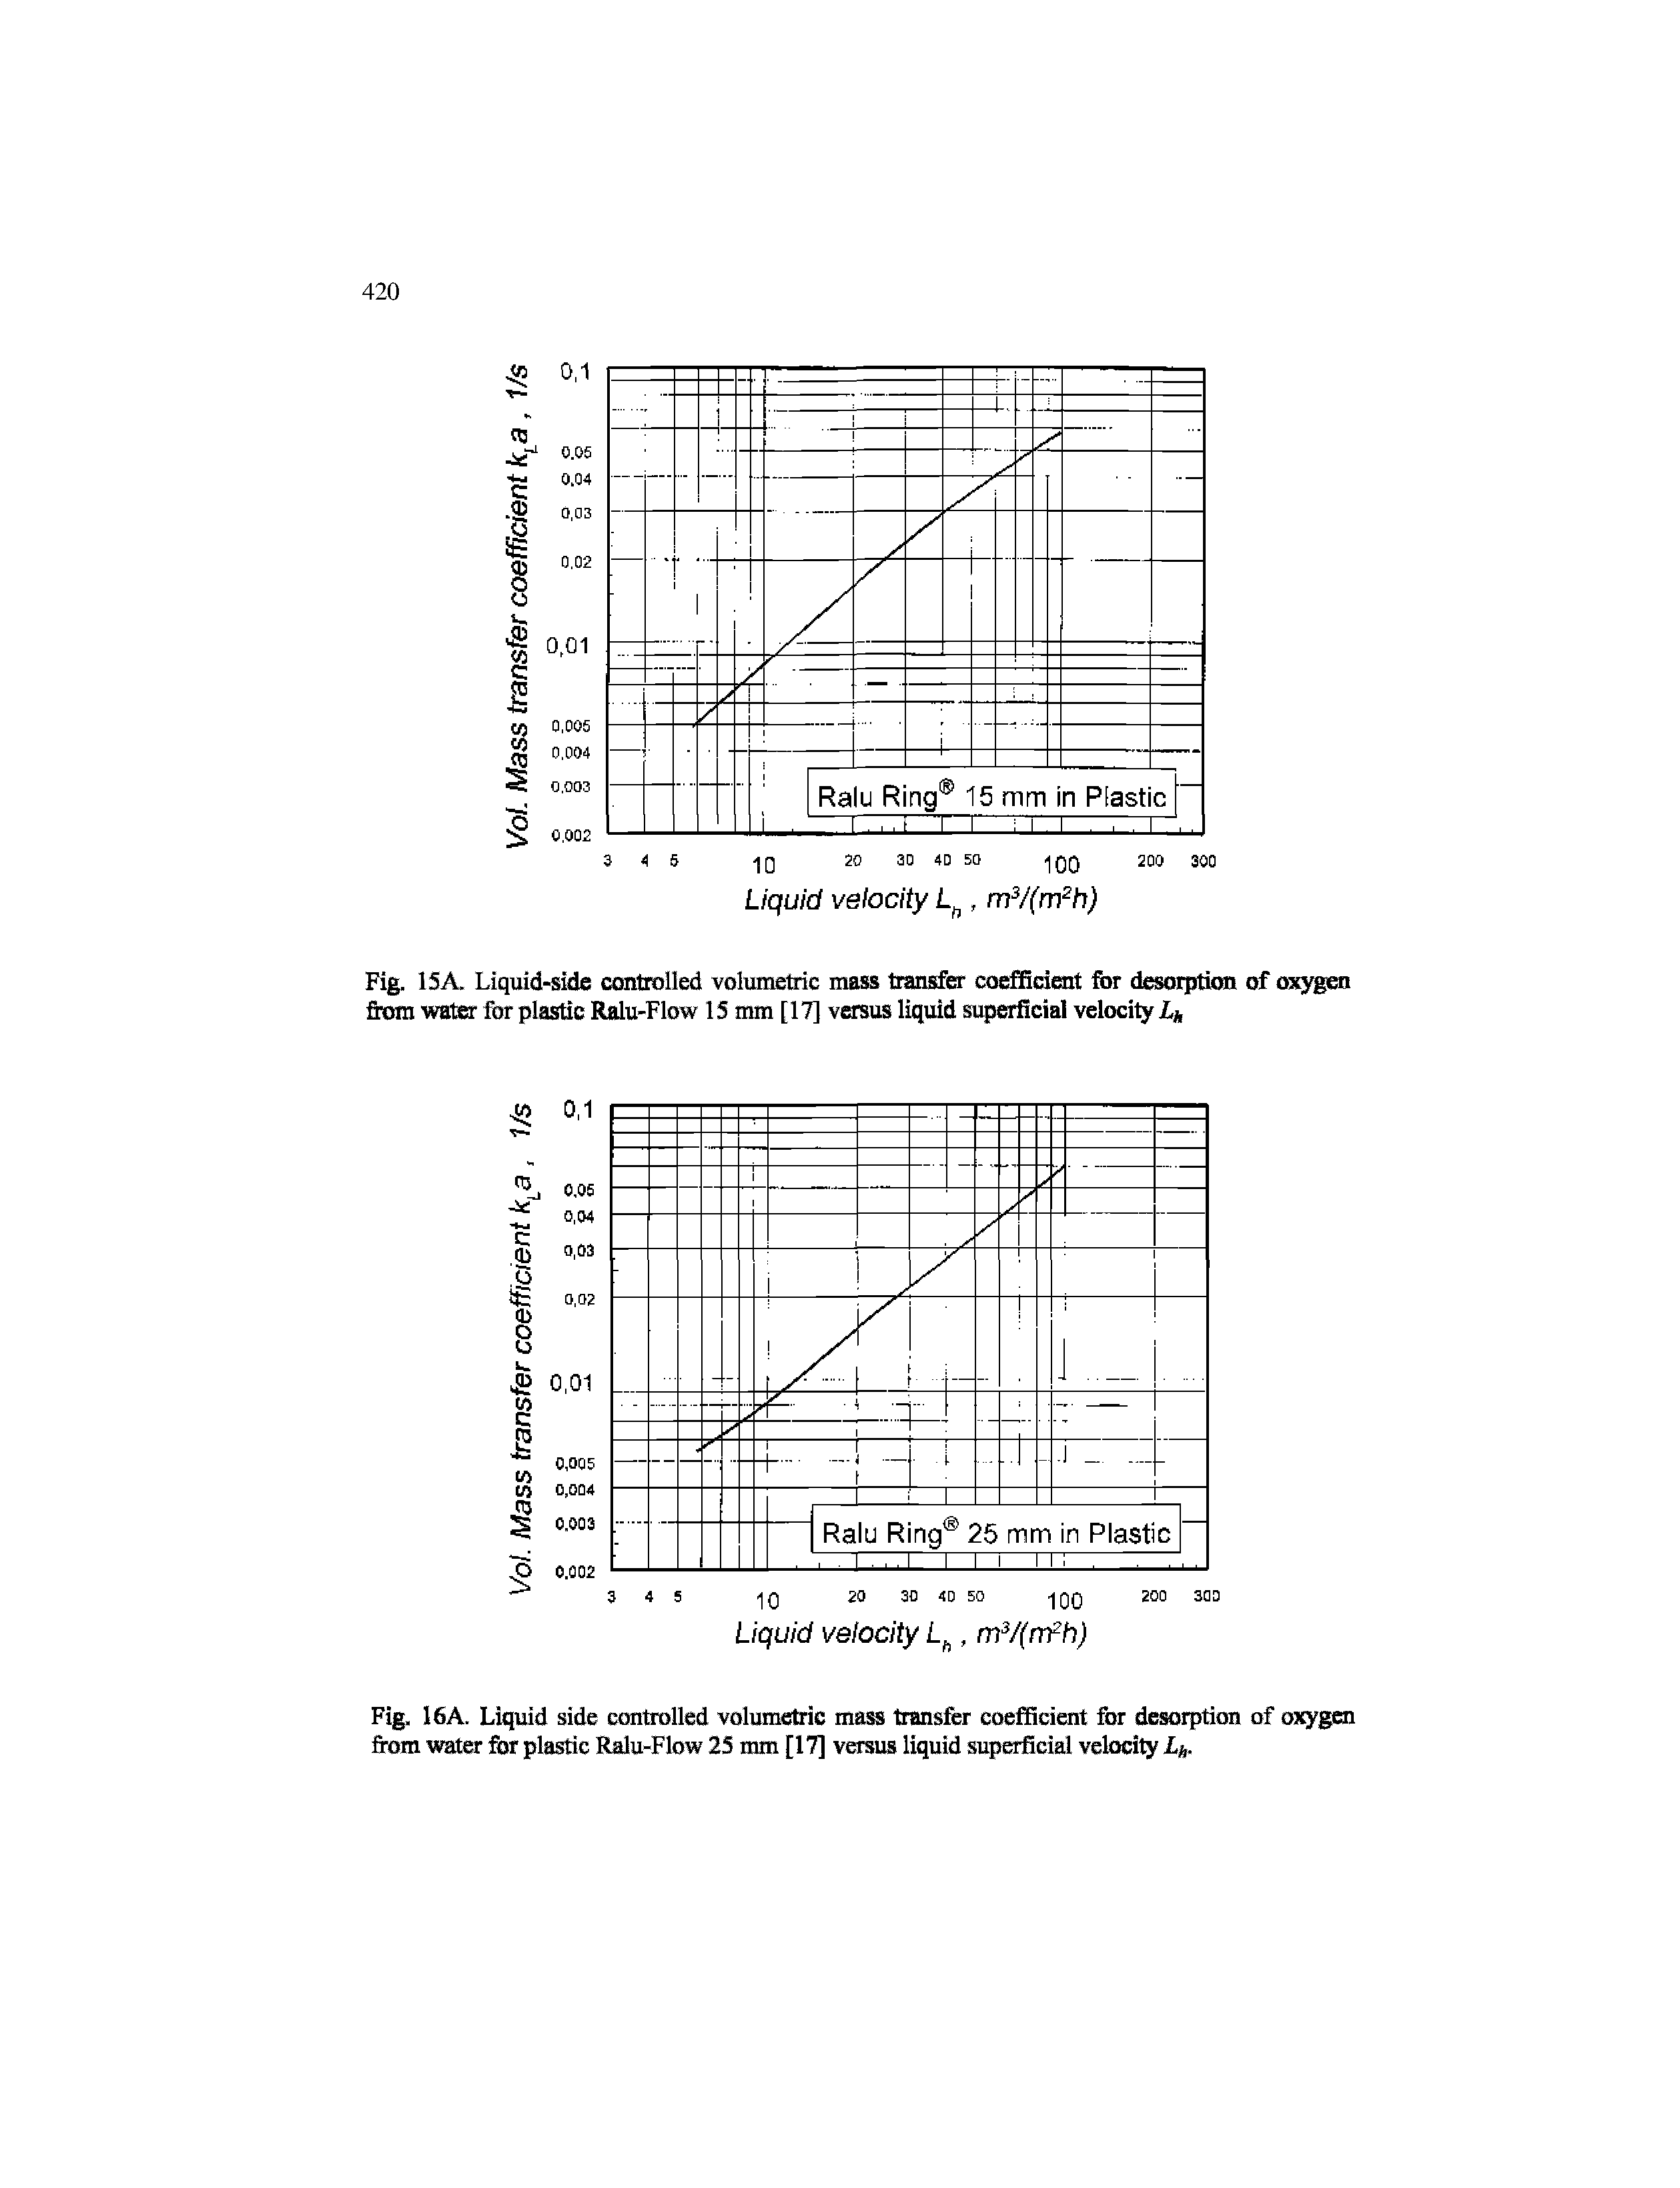 Fig. 16A. Liquid side controlled volumetric mass transfer coefficient for desorption of oxygen om water for plastic Ralu-Flow 25 mm [17] versus liquid supcrficM velocity .